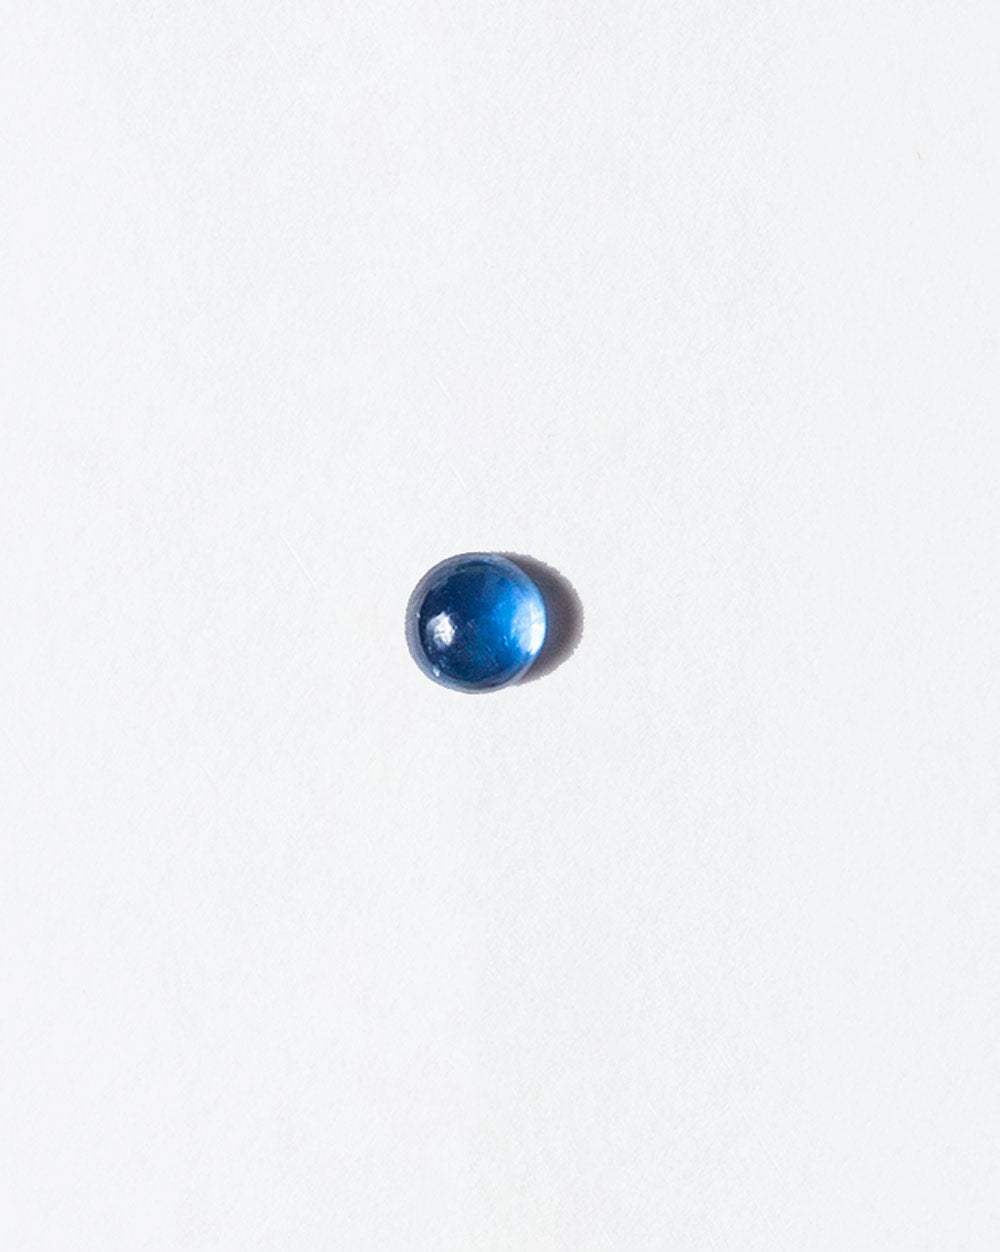 Sapphire cabochon on light color background.